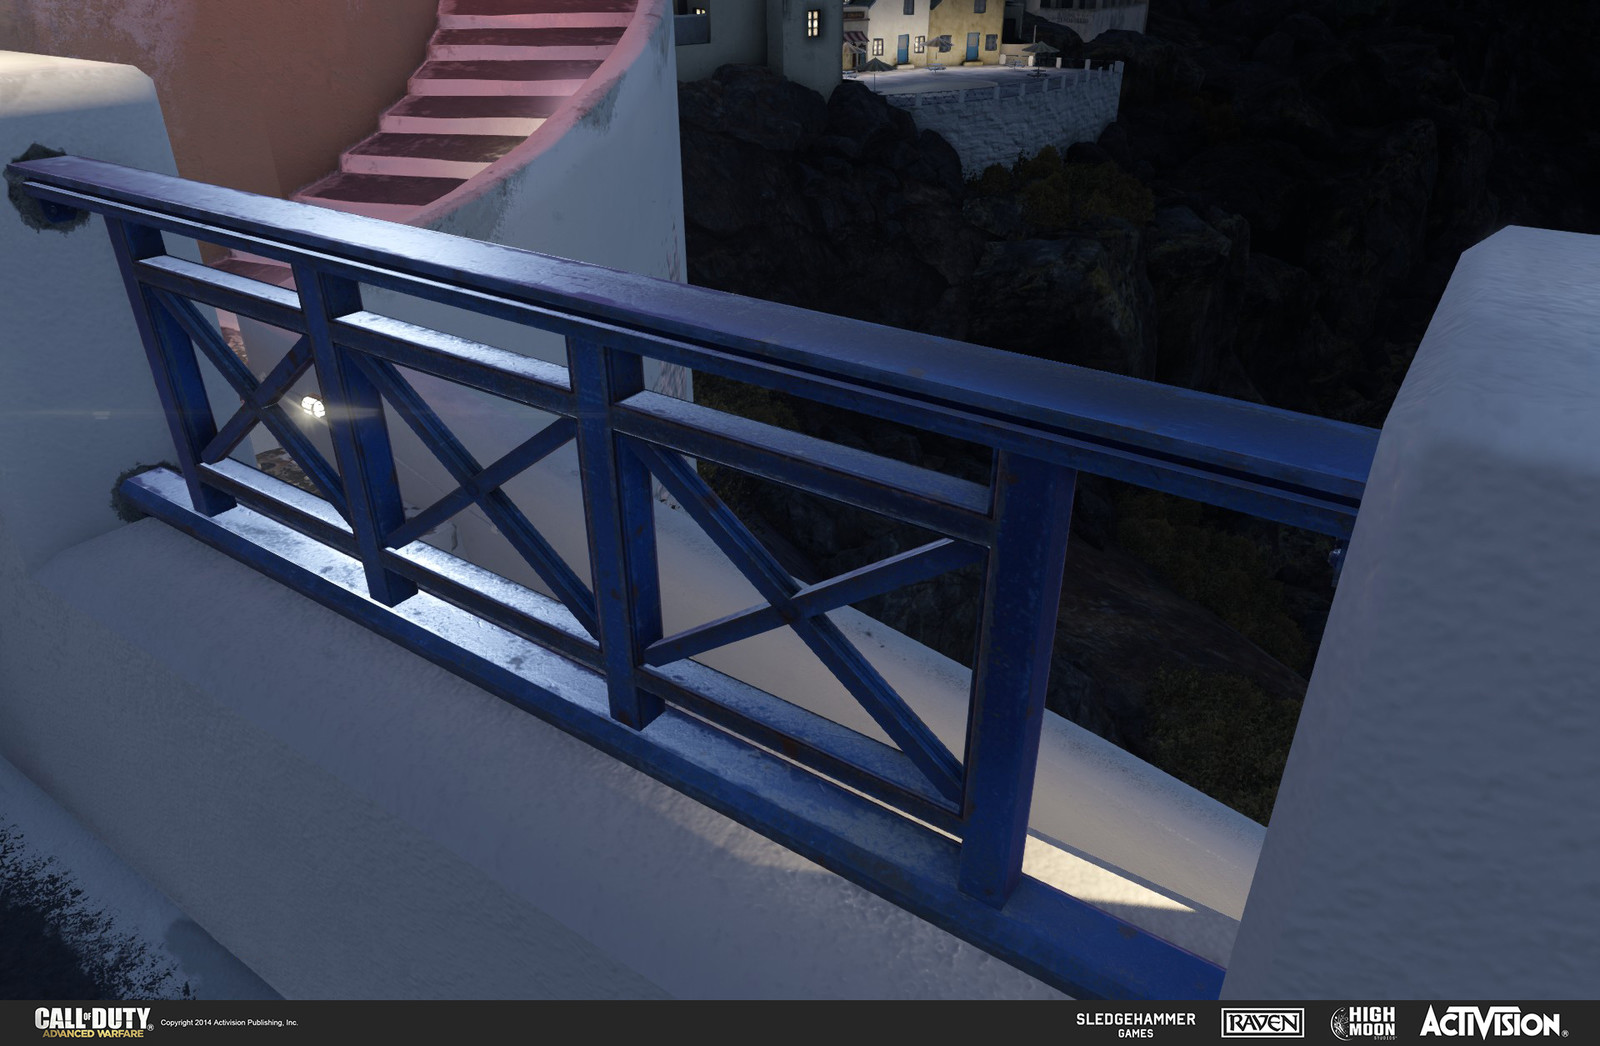 Created the blue railing model used throughout the multiplayer map Terrace. The railing was created using 3DSMax and textured using Photoshop and Quixel's DDO.